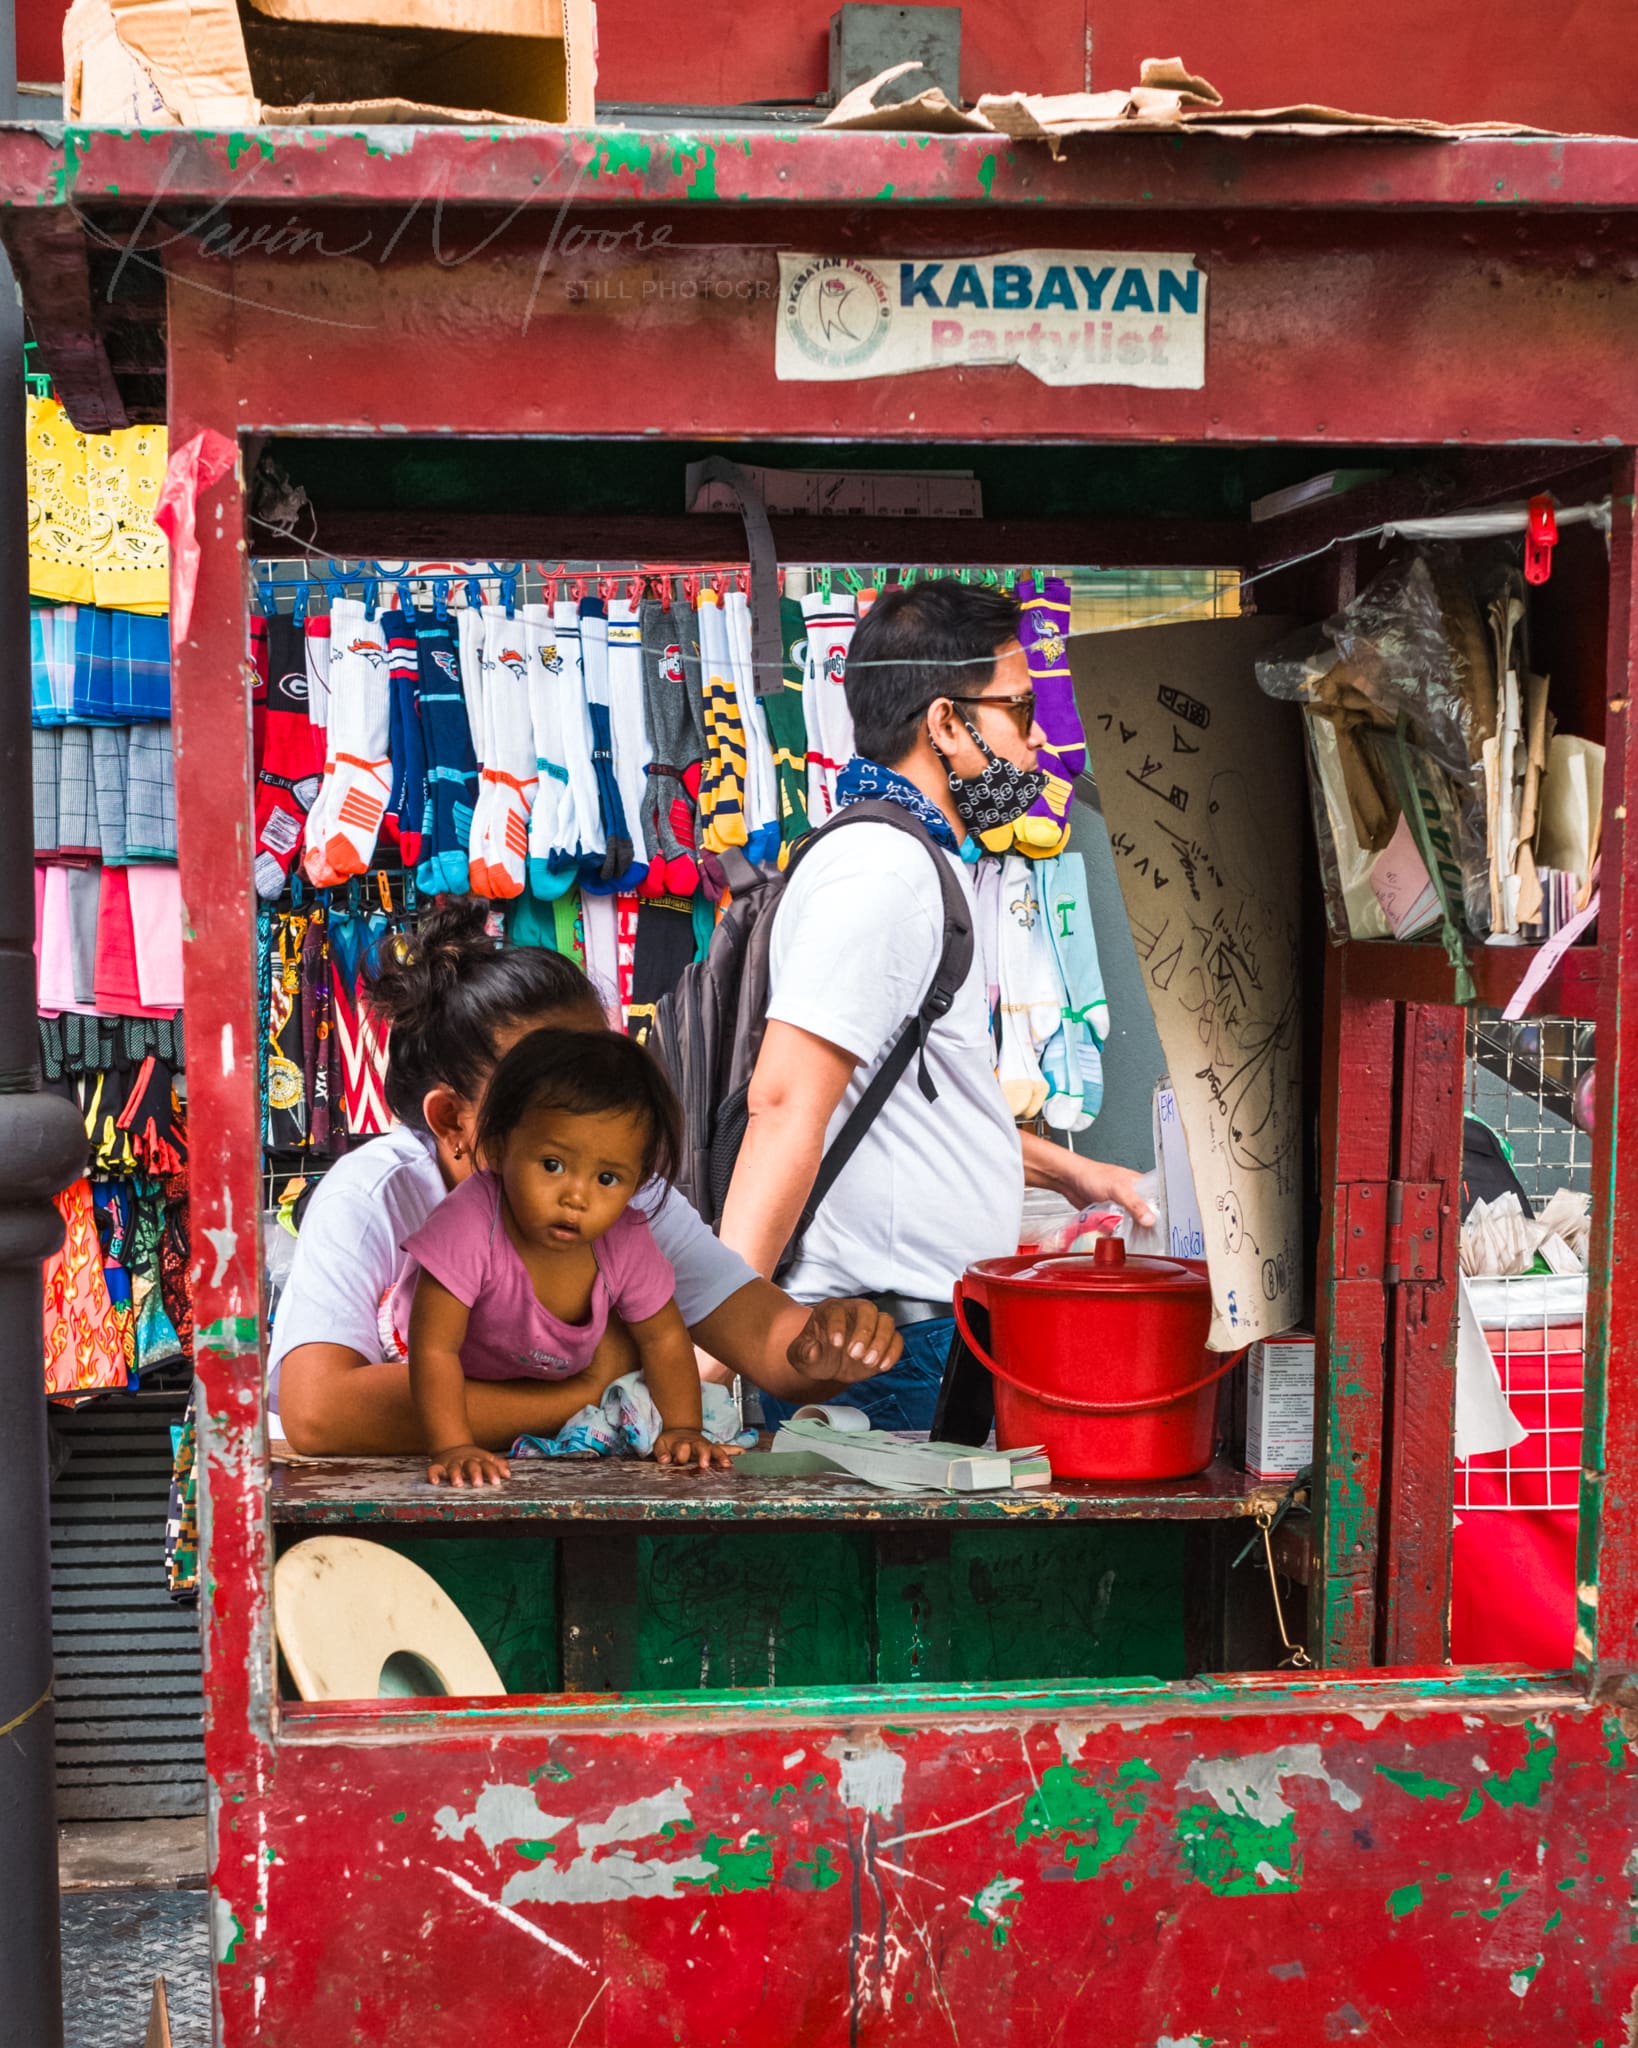 Filipino street vendor stall with a toddler and colorful merchandise during COVID-19.